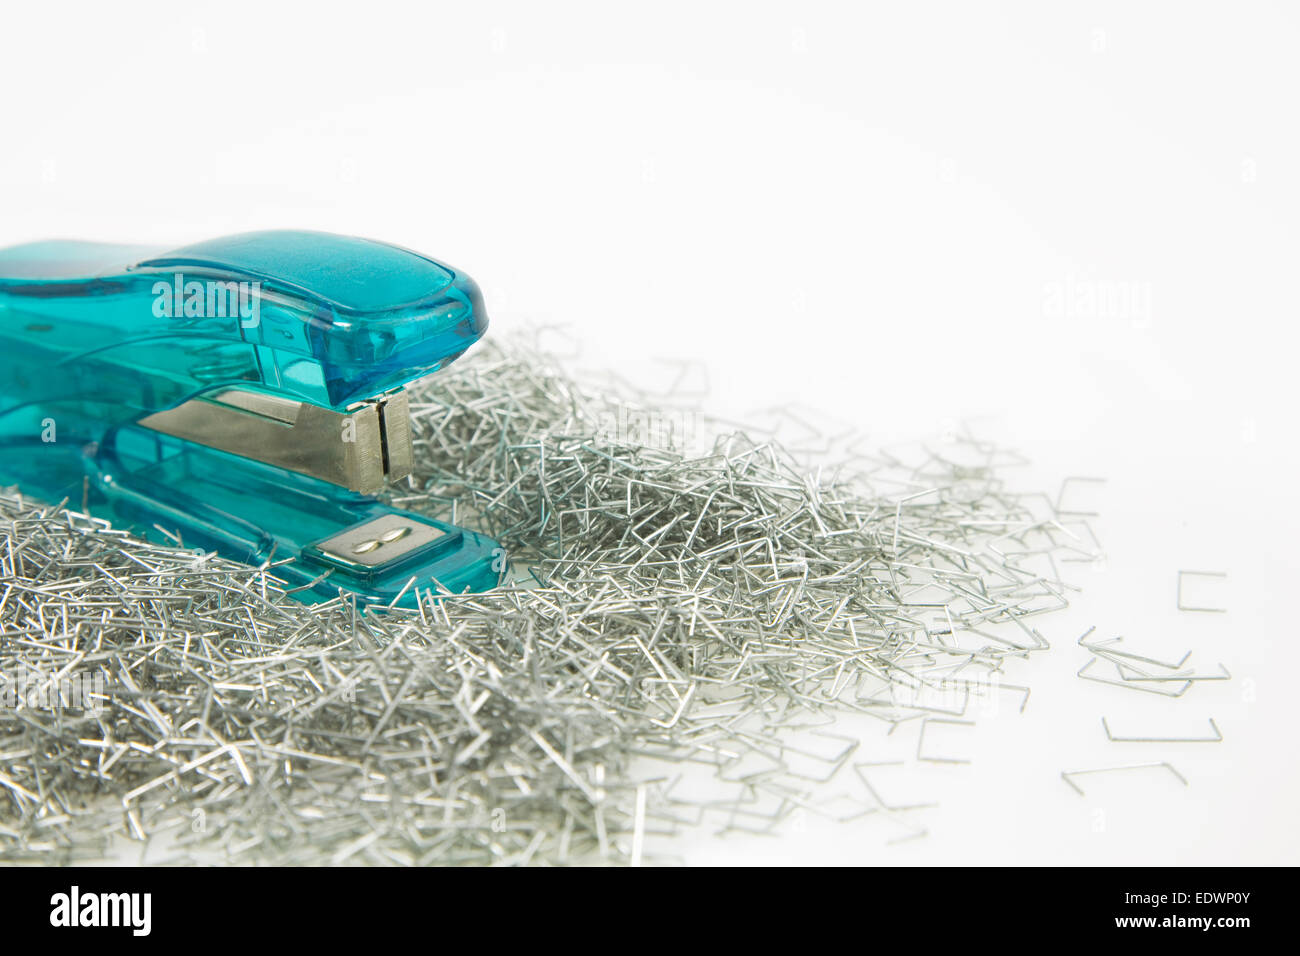 green Stapler and staples Isolated on a white background, Stock Photo